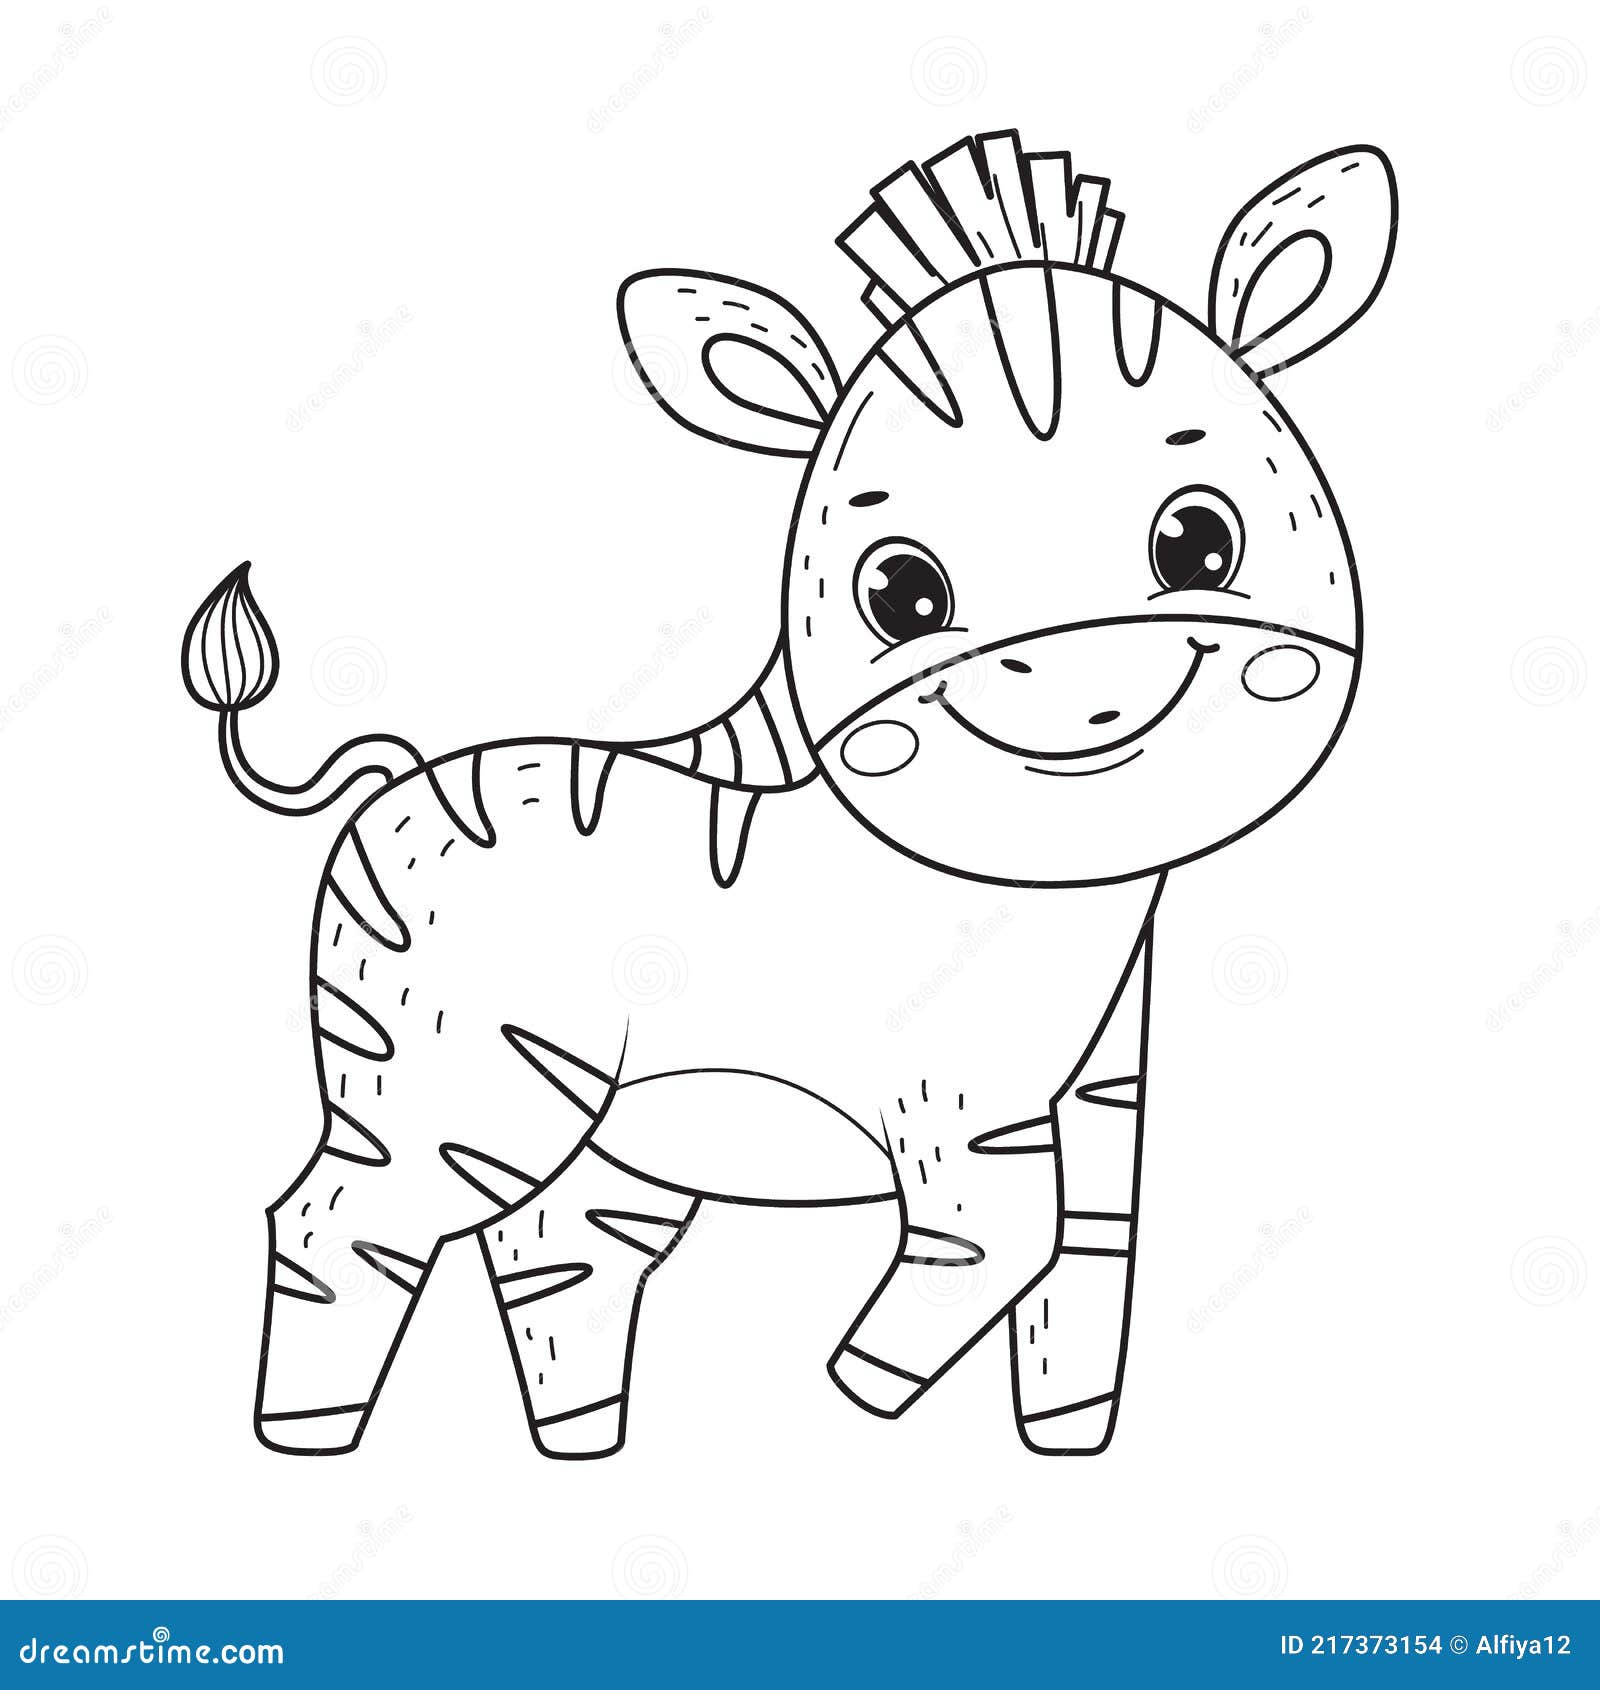 Childrens Coloring Books: Baby Cute Animals Design and Pets